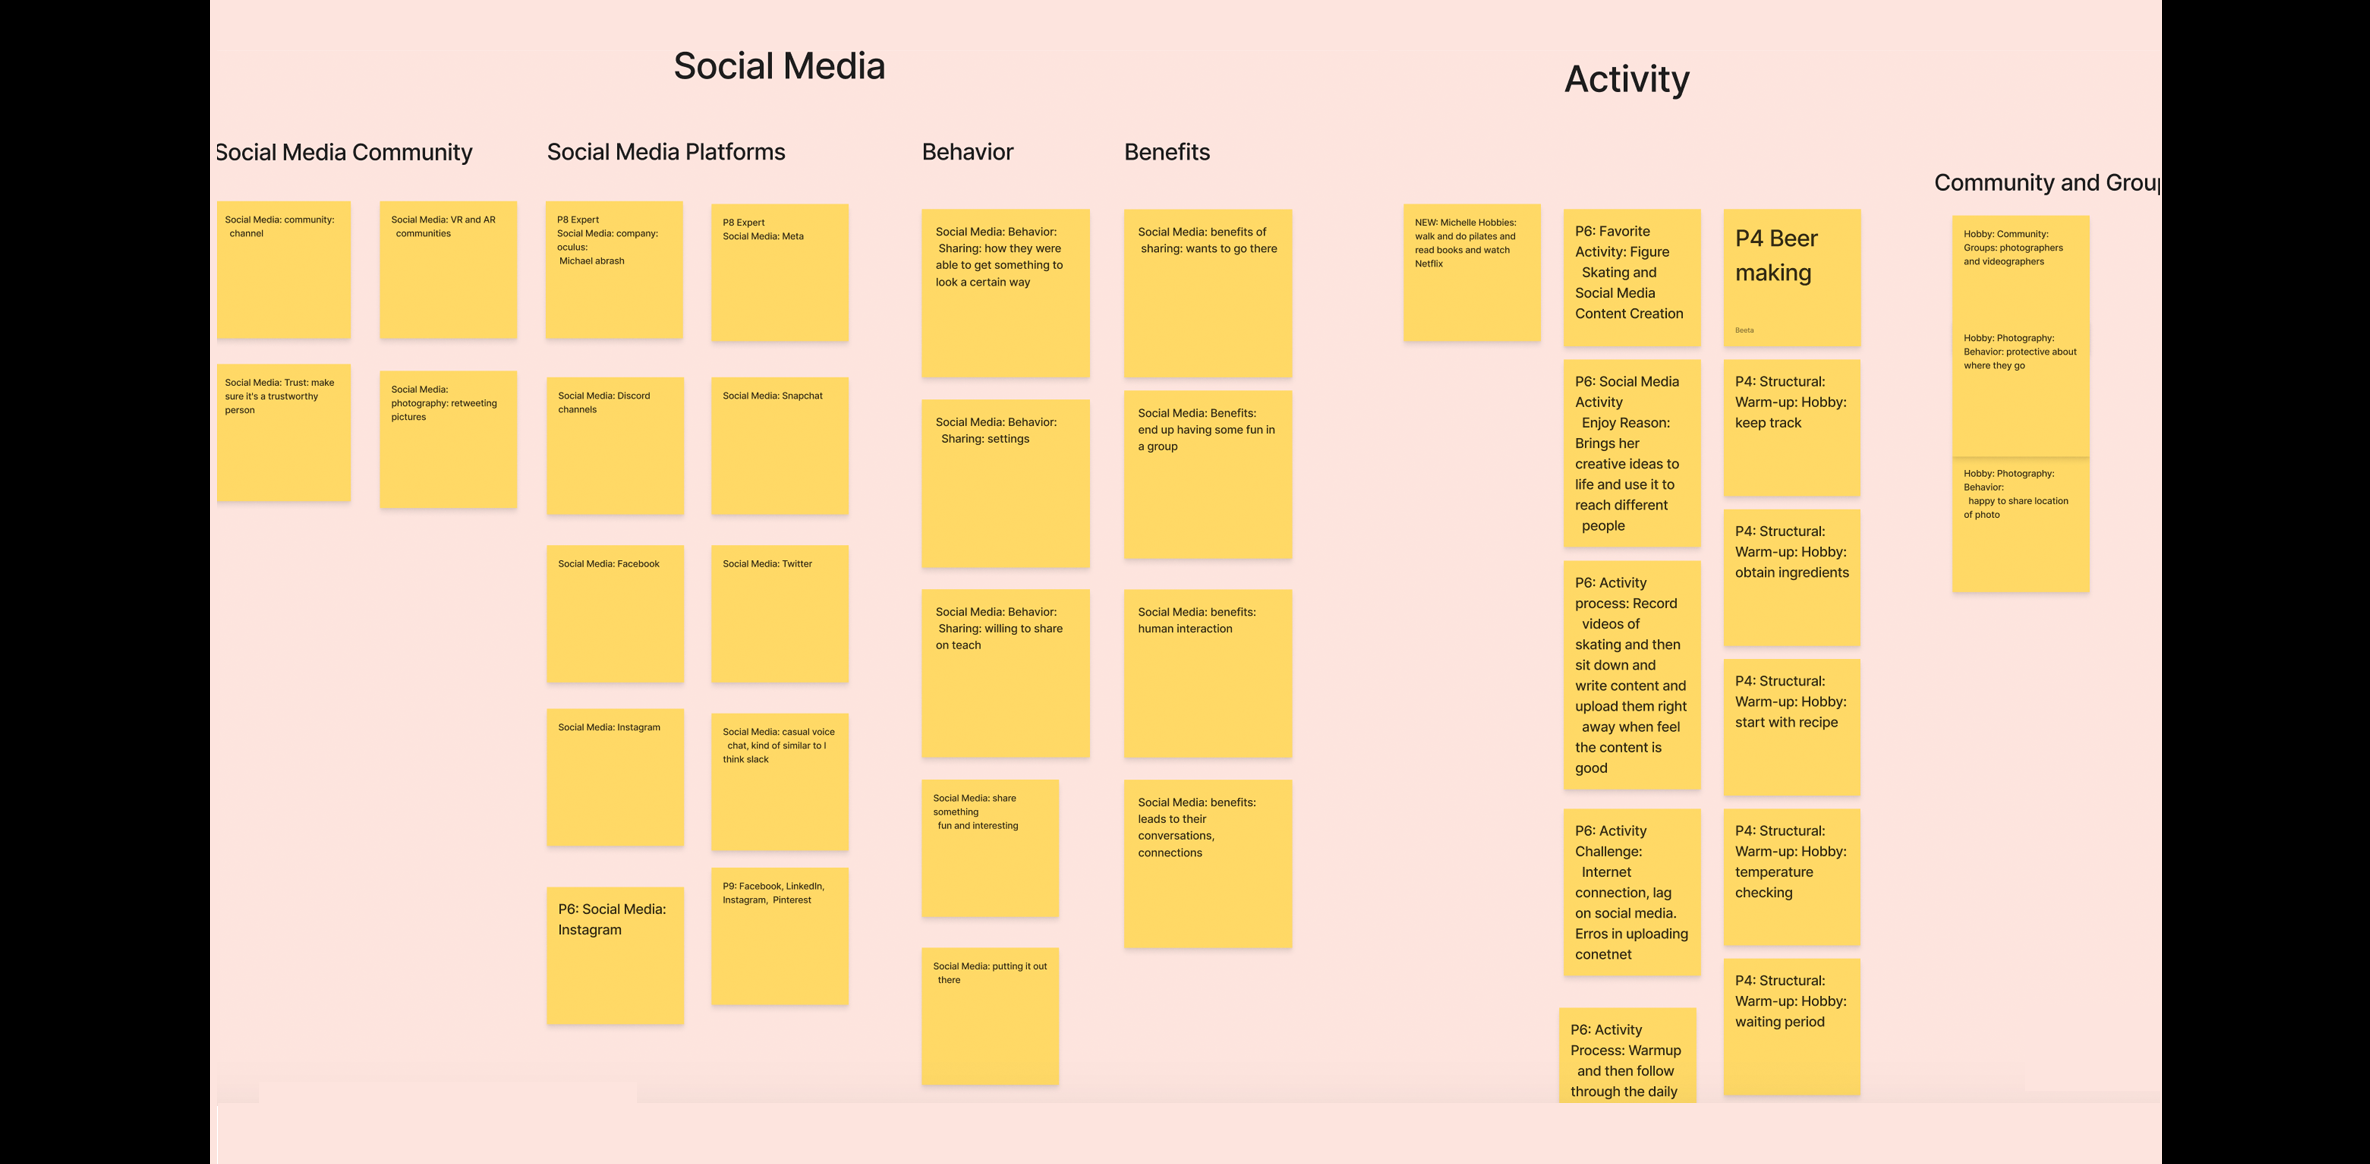 Expert Affinity Diagram of Social Media and Activity/Hobbies categories.